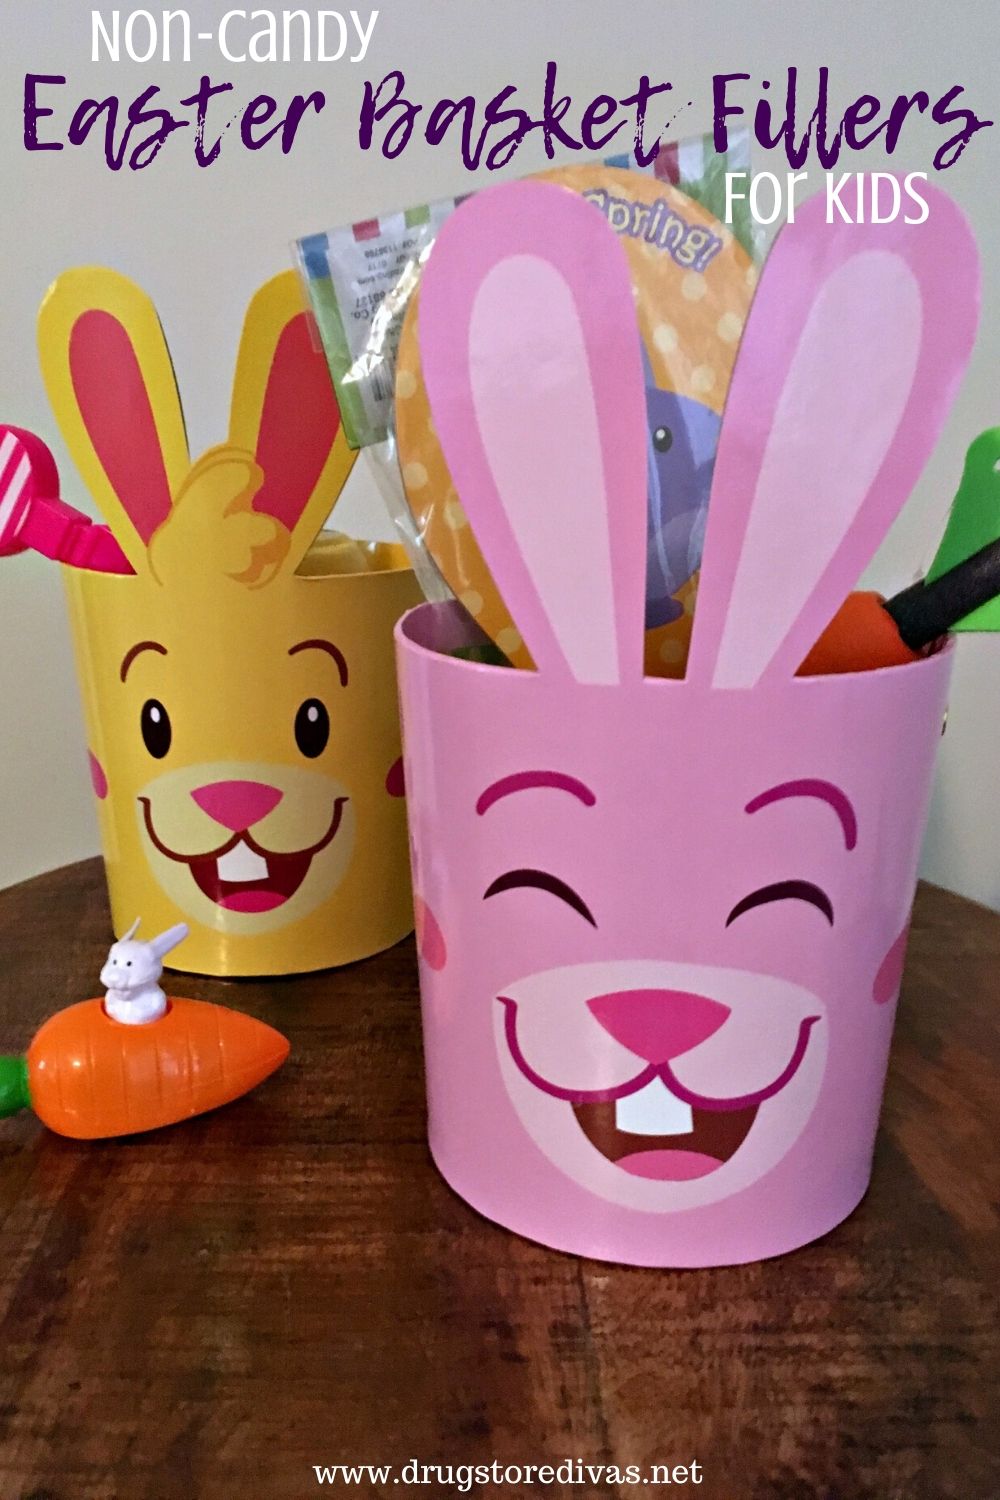 Two bunny-shaped Easter baskets with the words 